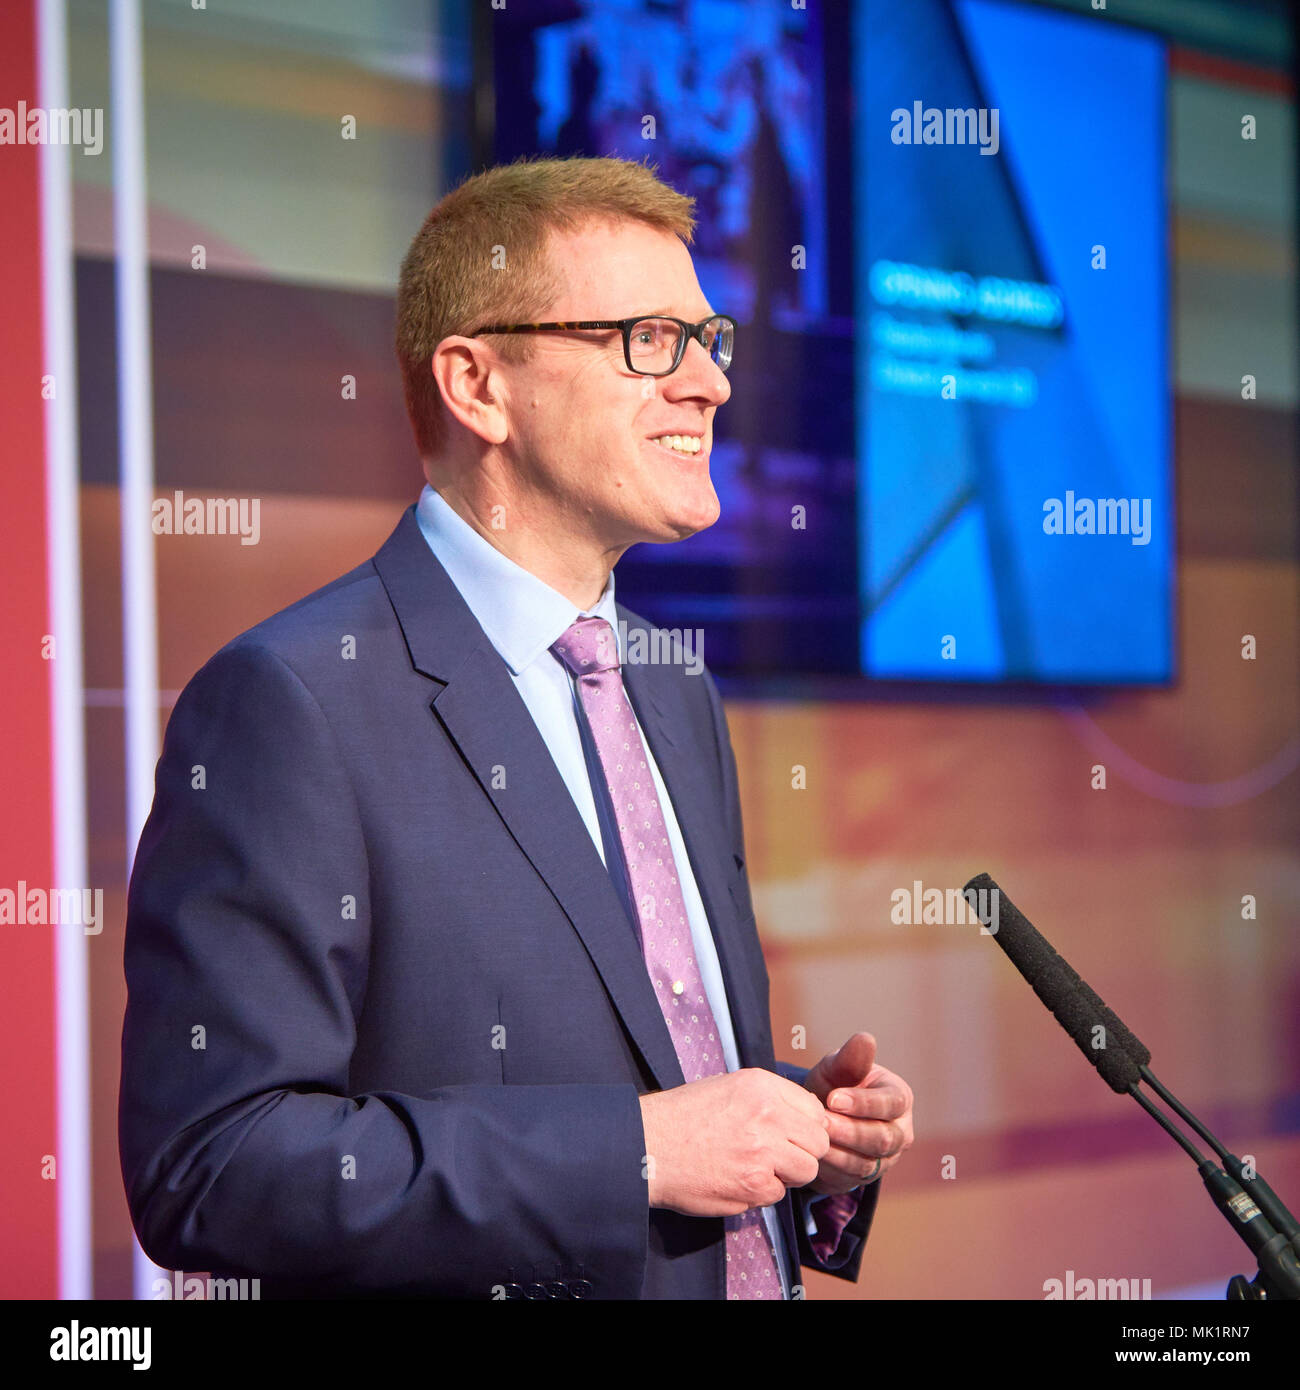 Director General STEPHEN MARTIN delivers a speech at the Institute of Directors Open House 2018 event held in the IoD's Pall Mall building Stock Photo